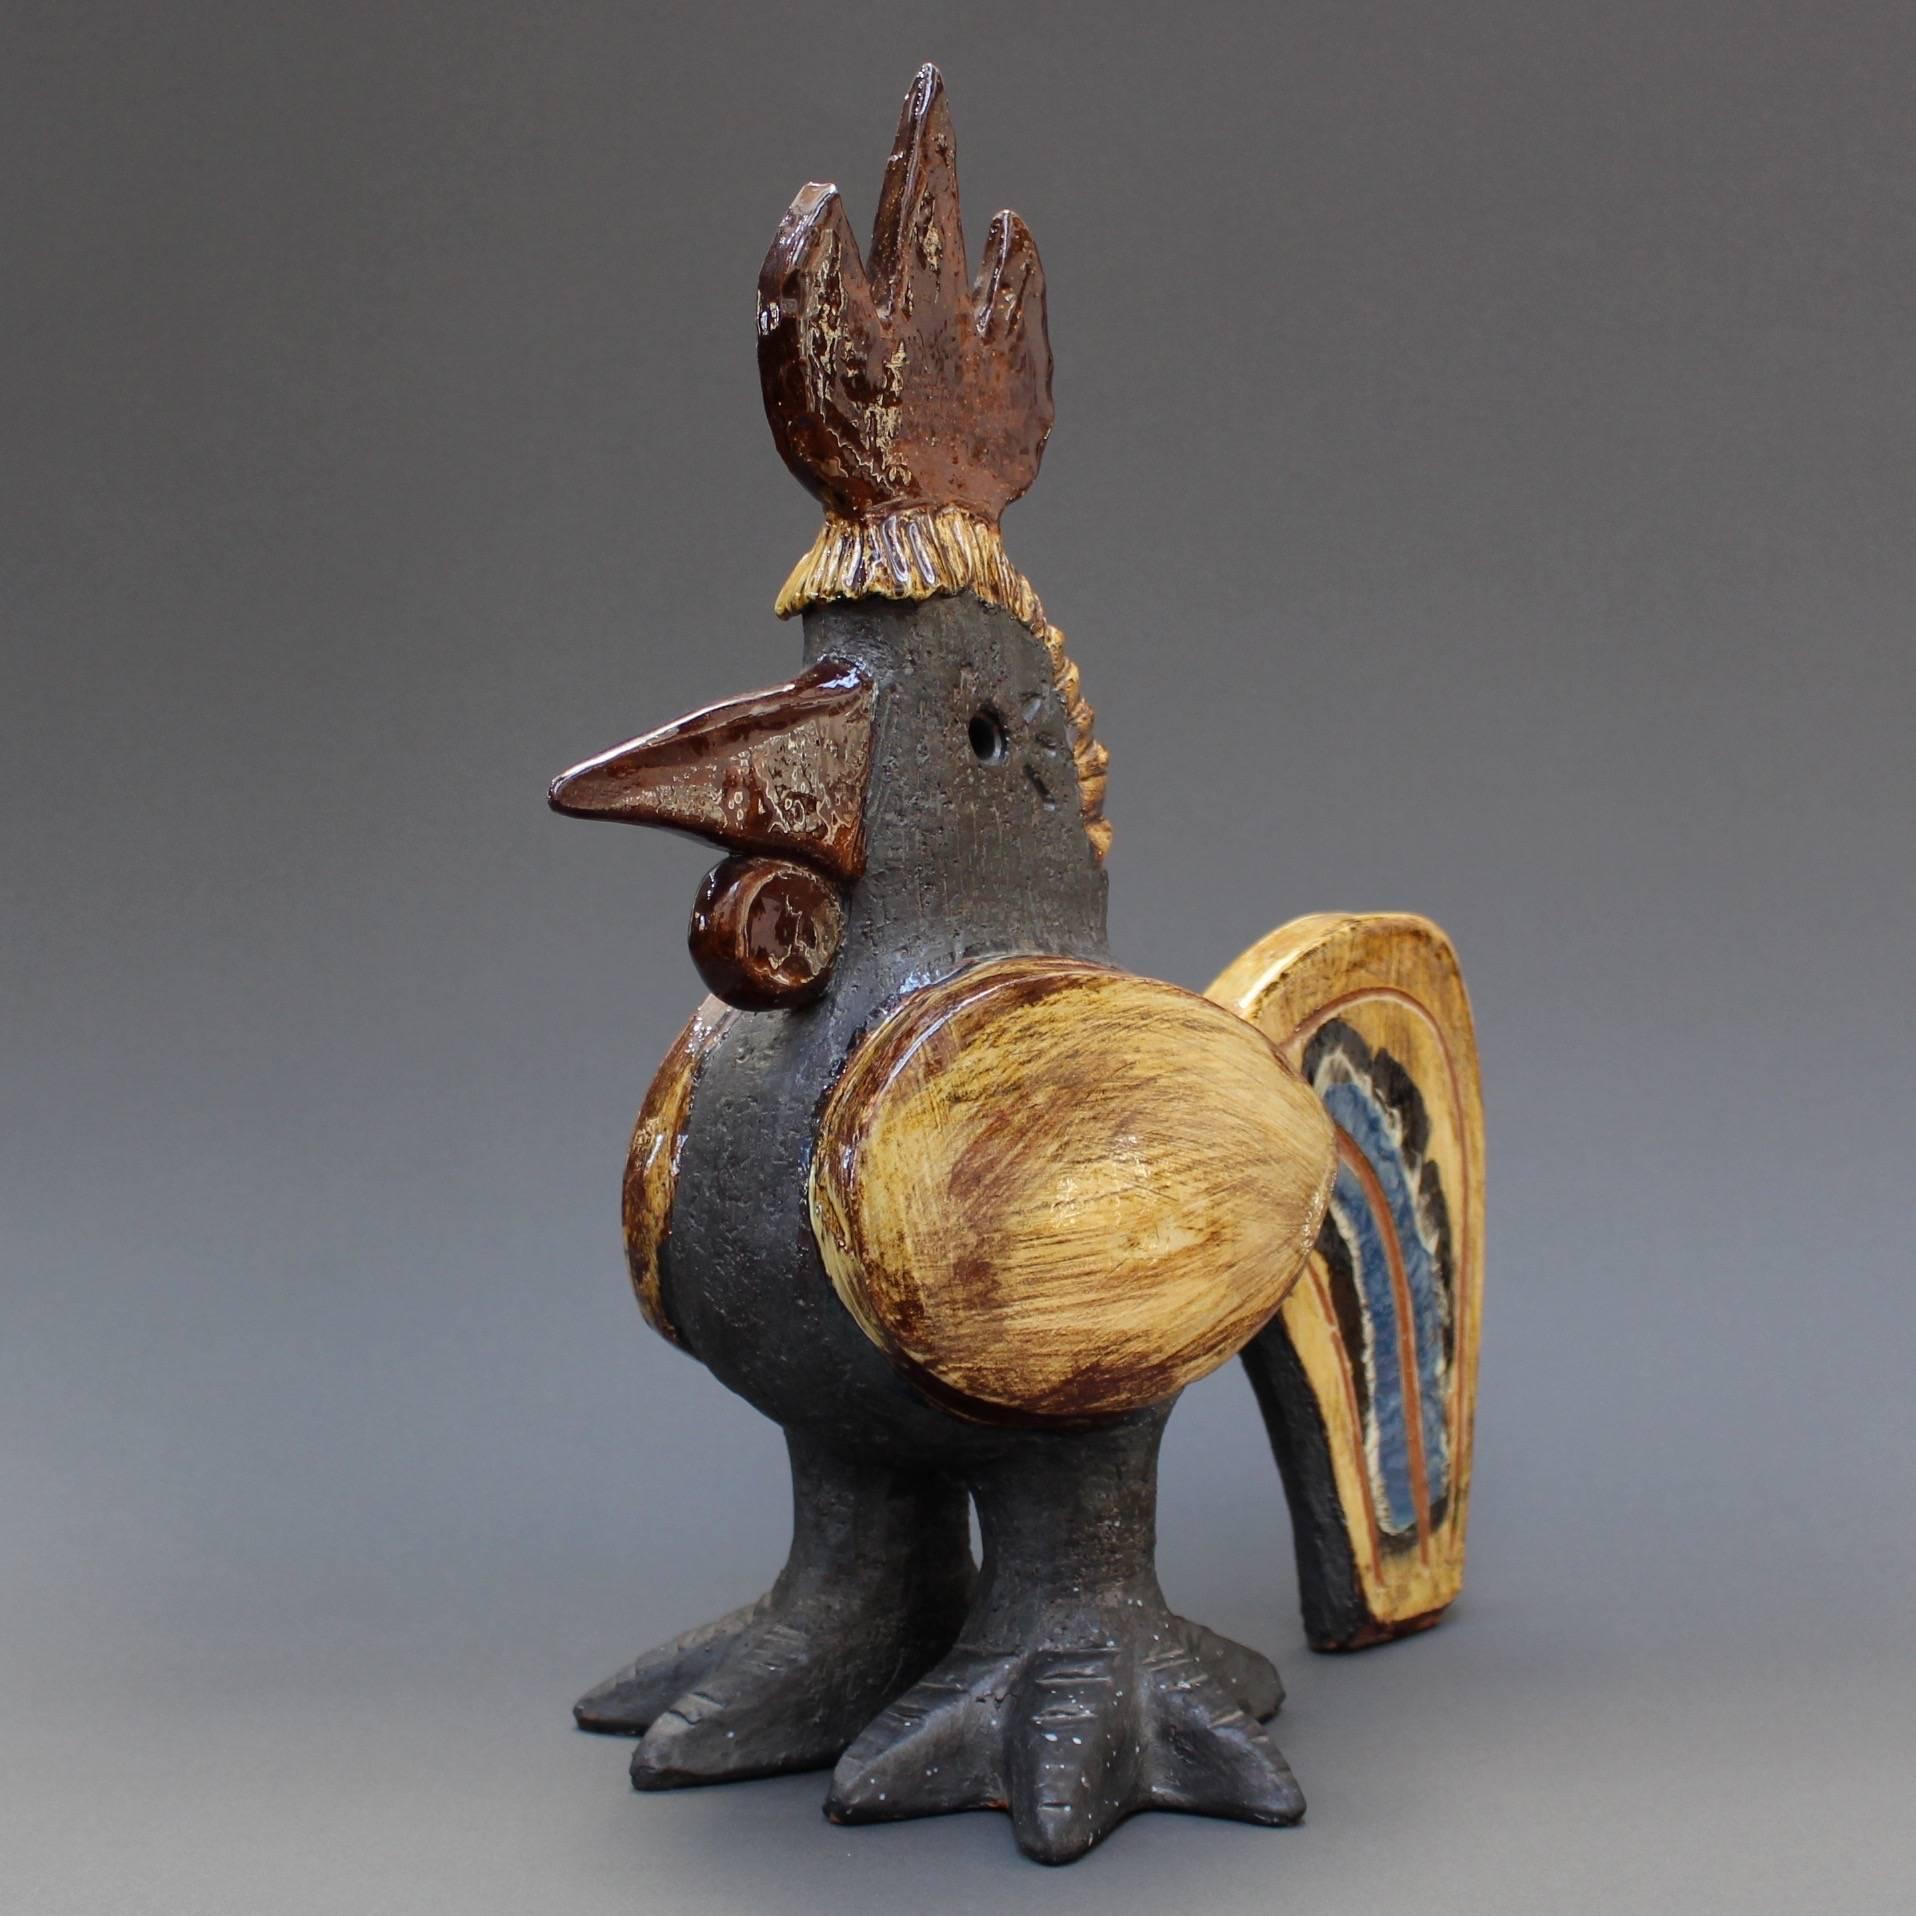 Glazed Ceramic French Rooster Sculpture by Dominique Pouchain, circa 1990s